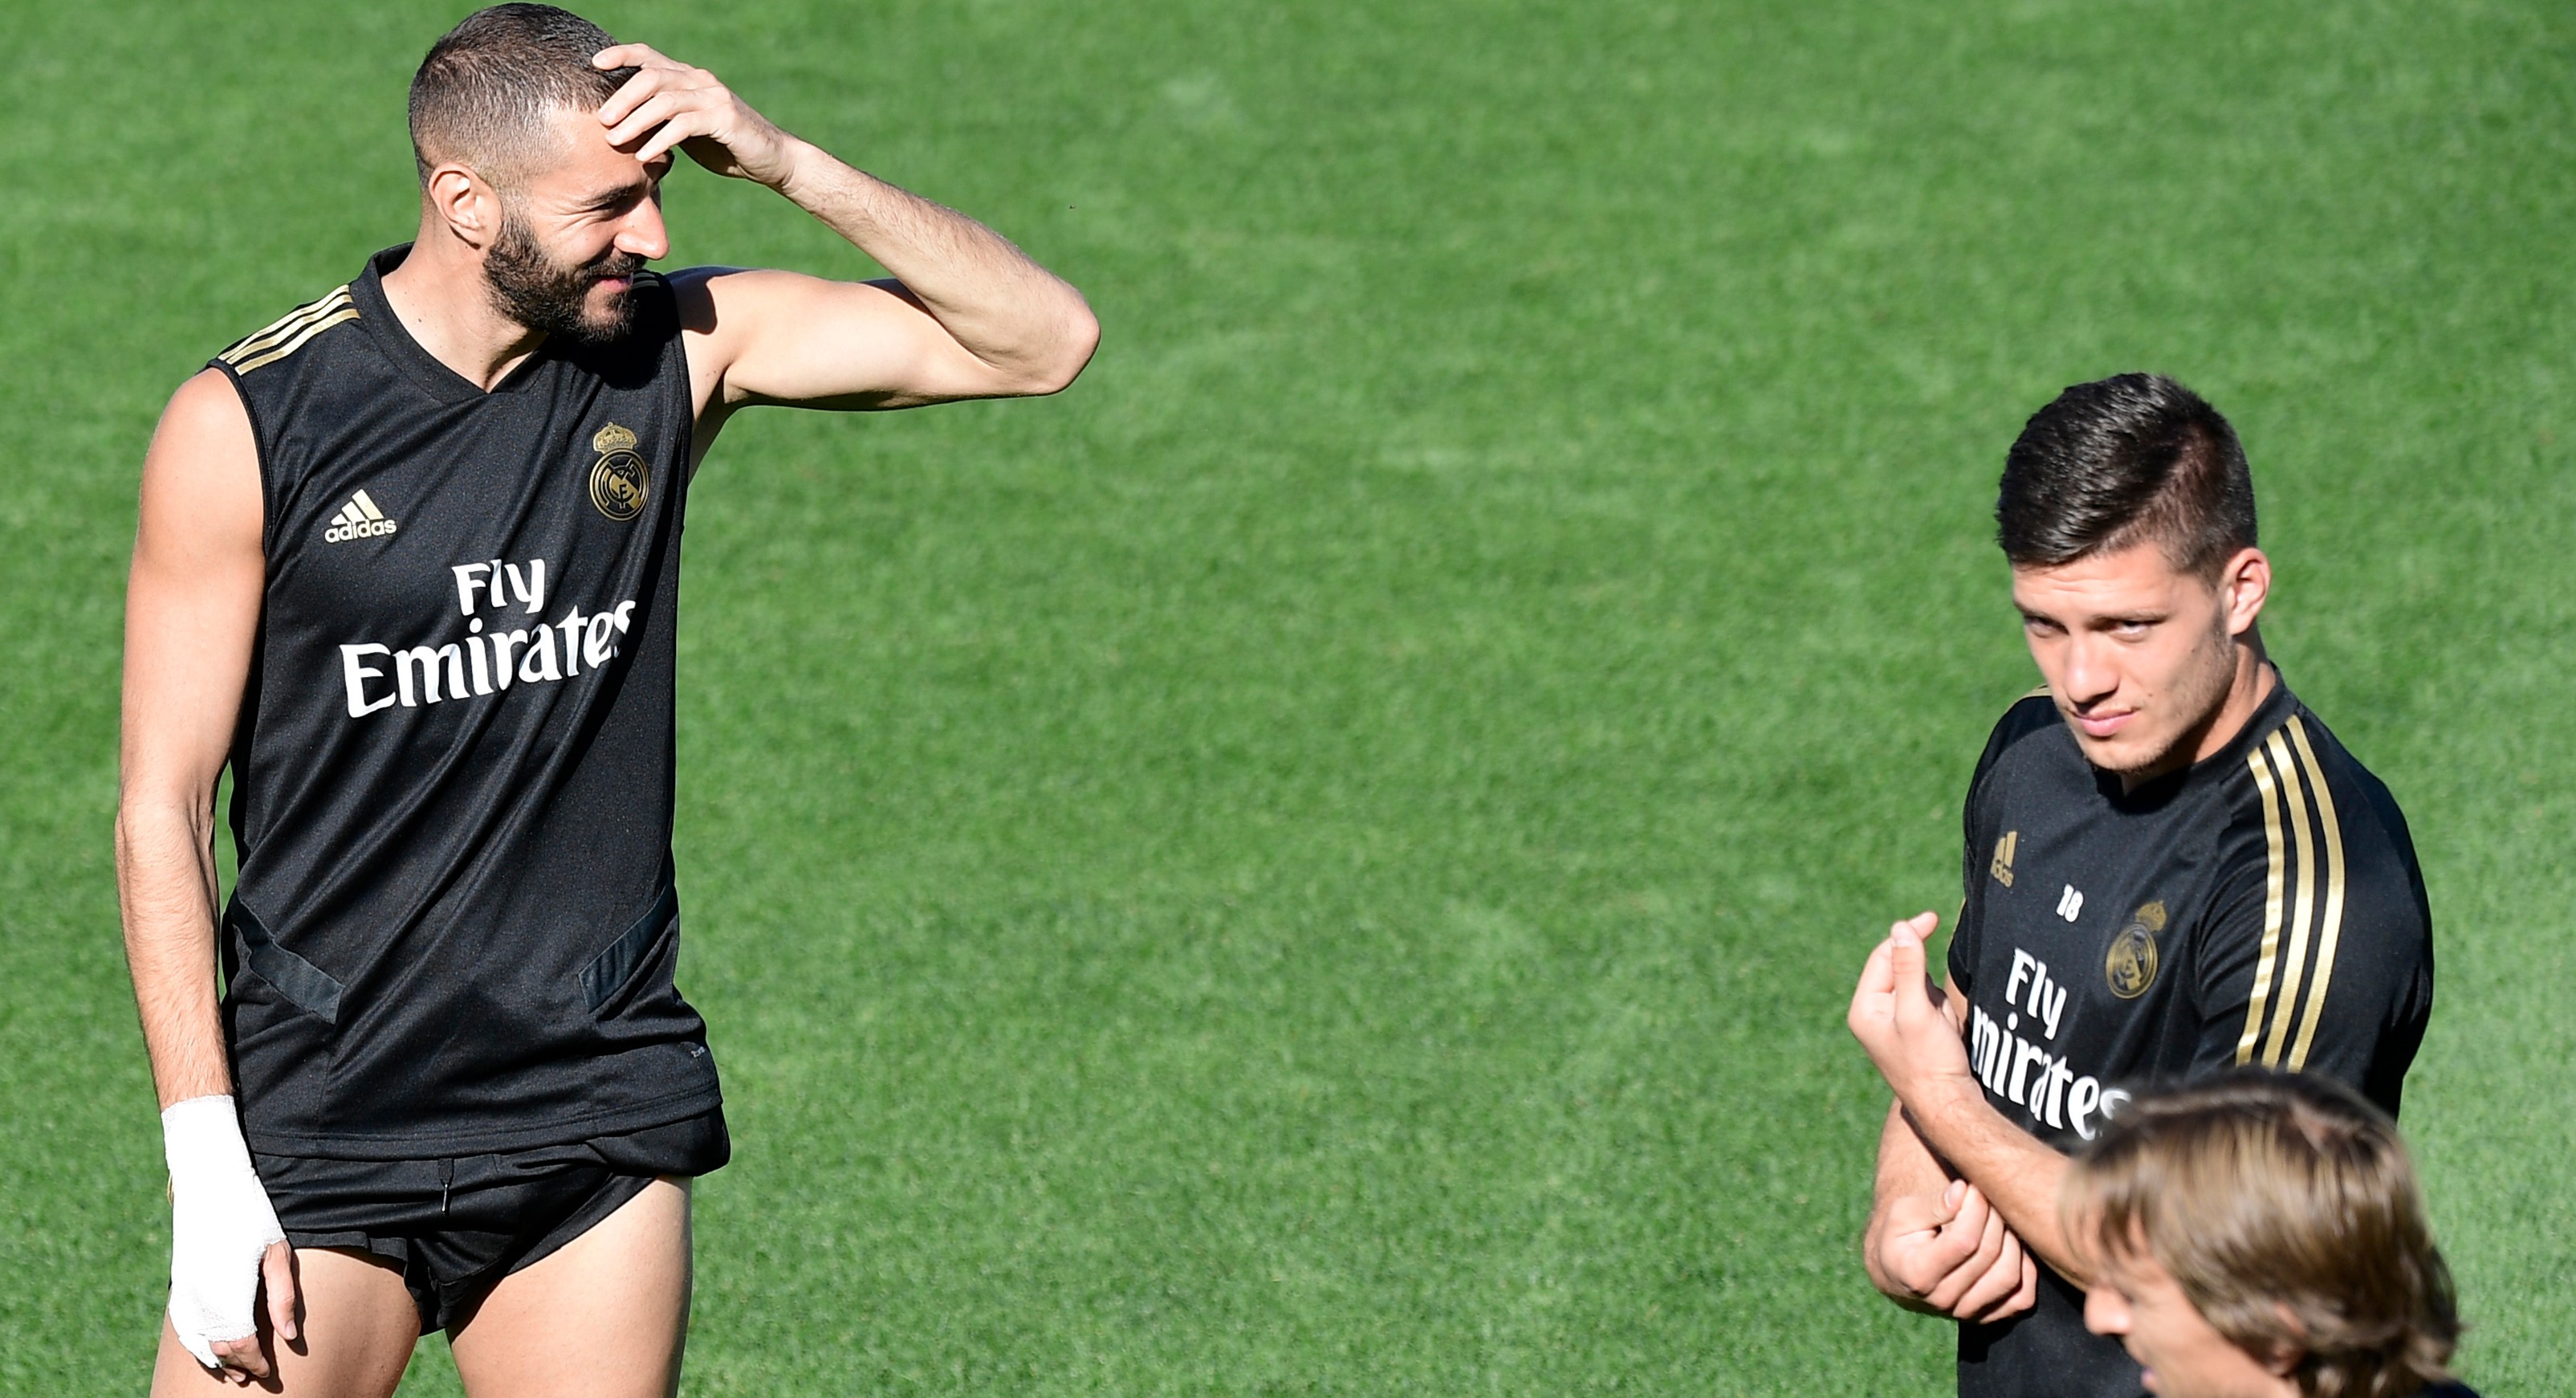 Real Madrid's French forward Karim Benzema (L) and Real Madrid's Serbian forward Luka Jovic take part in a training session at Real Madrid's sport city in Madrid on August 16, 2019. (Photo by JAVIER SORIANO / AFP)        (Photo credit should read JAVIER SORIANO/AFP/Getty Images)